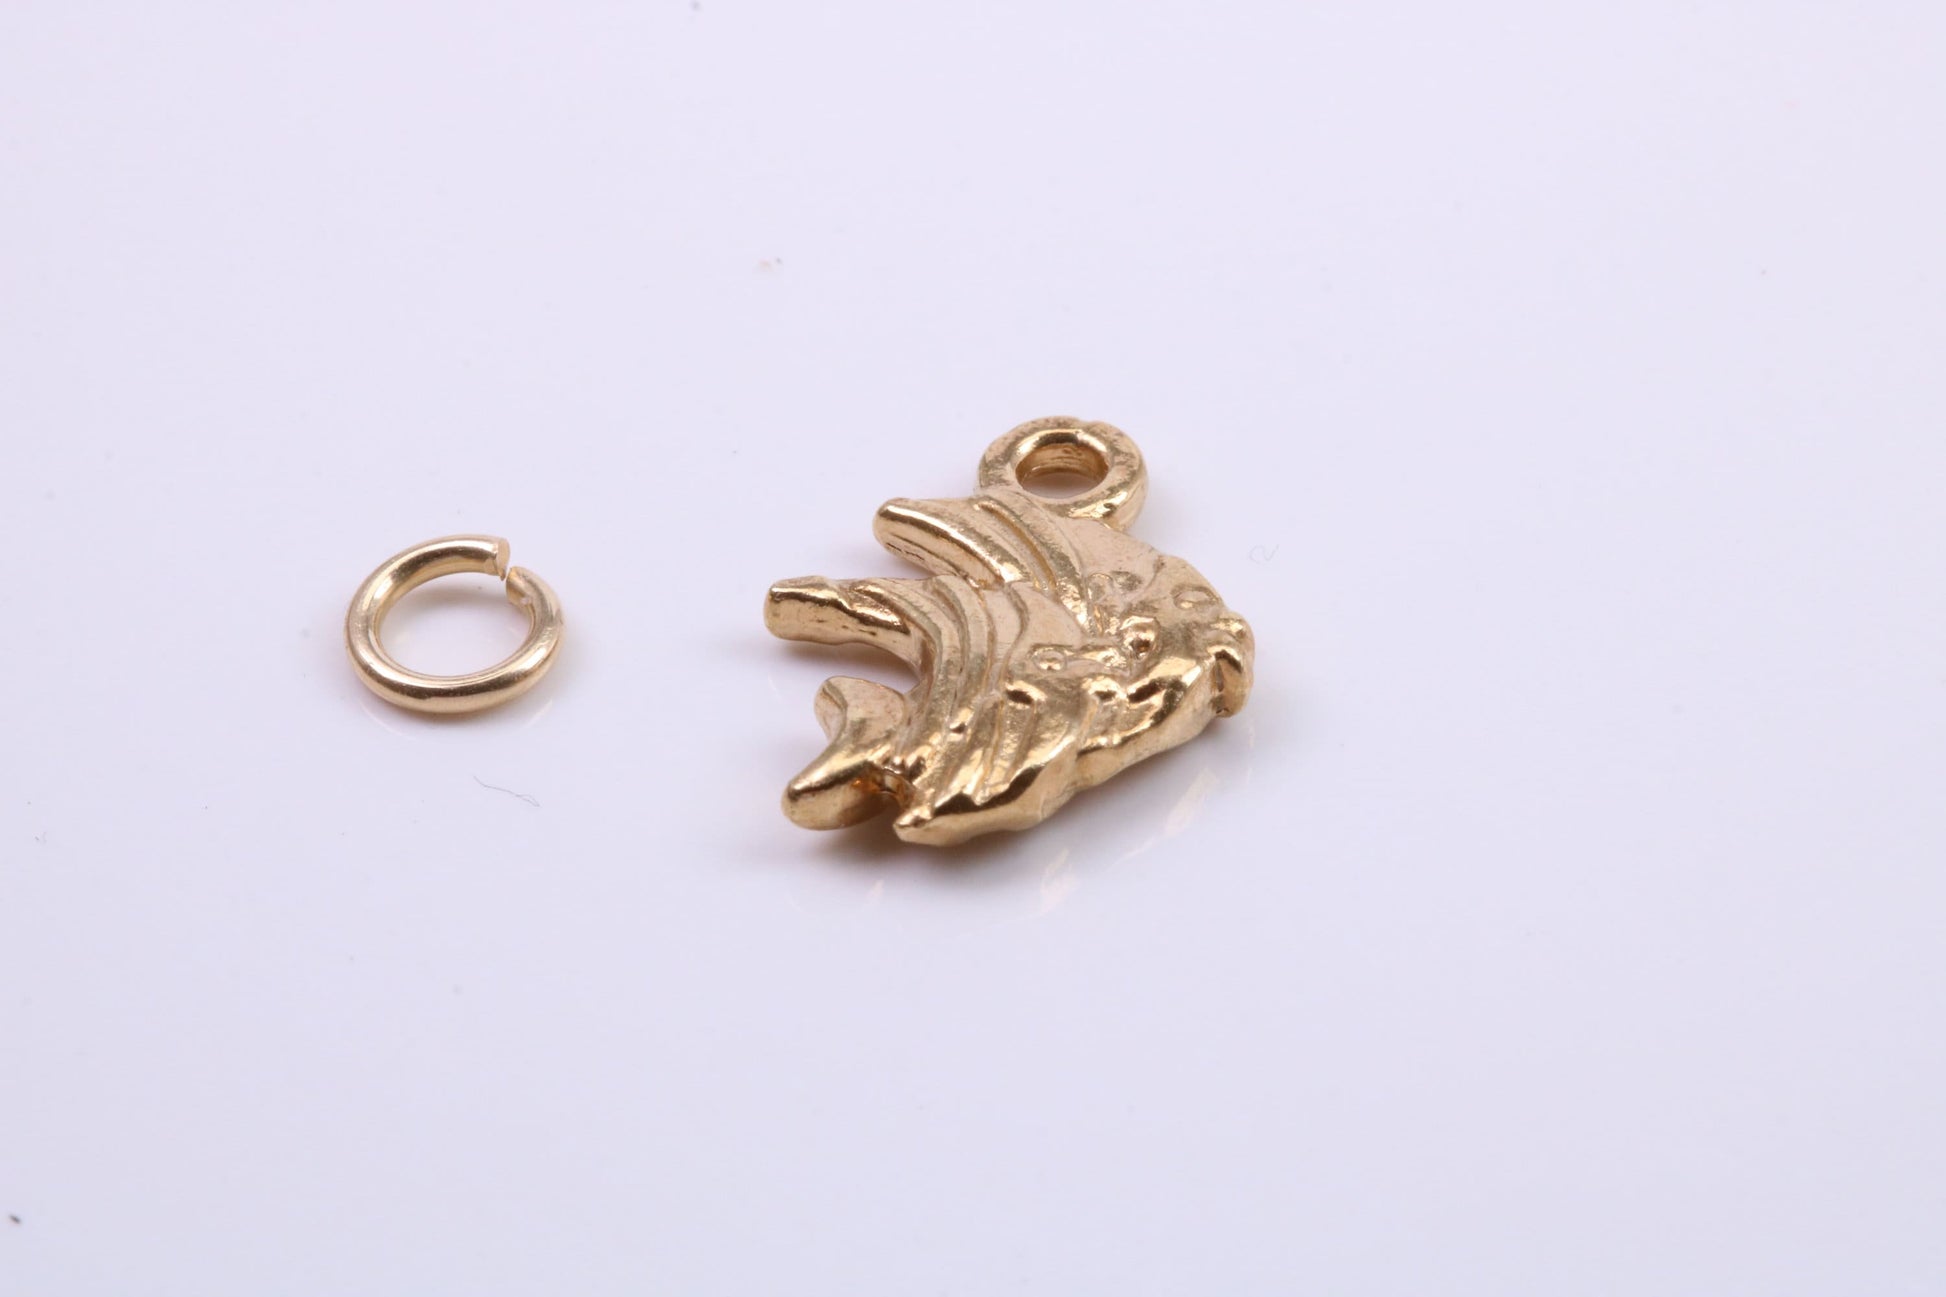 Angel Fish Charm, Traditional Charm, Made from Solid 9ct Yellow Gold, British Hallmarked, Complete with Attachment Link